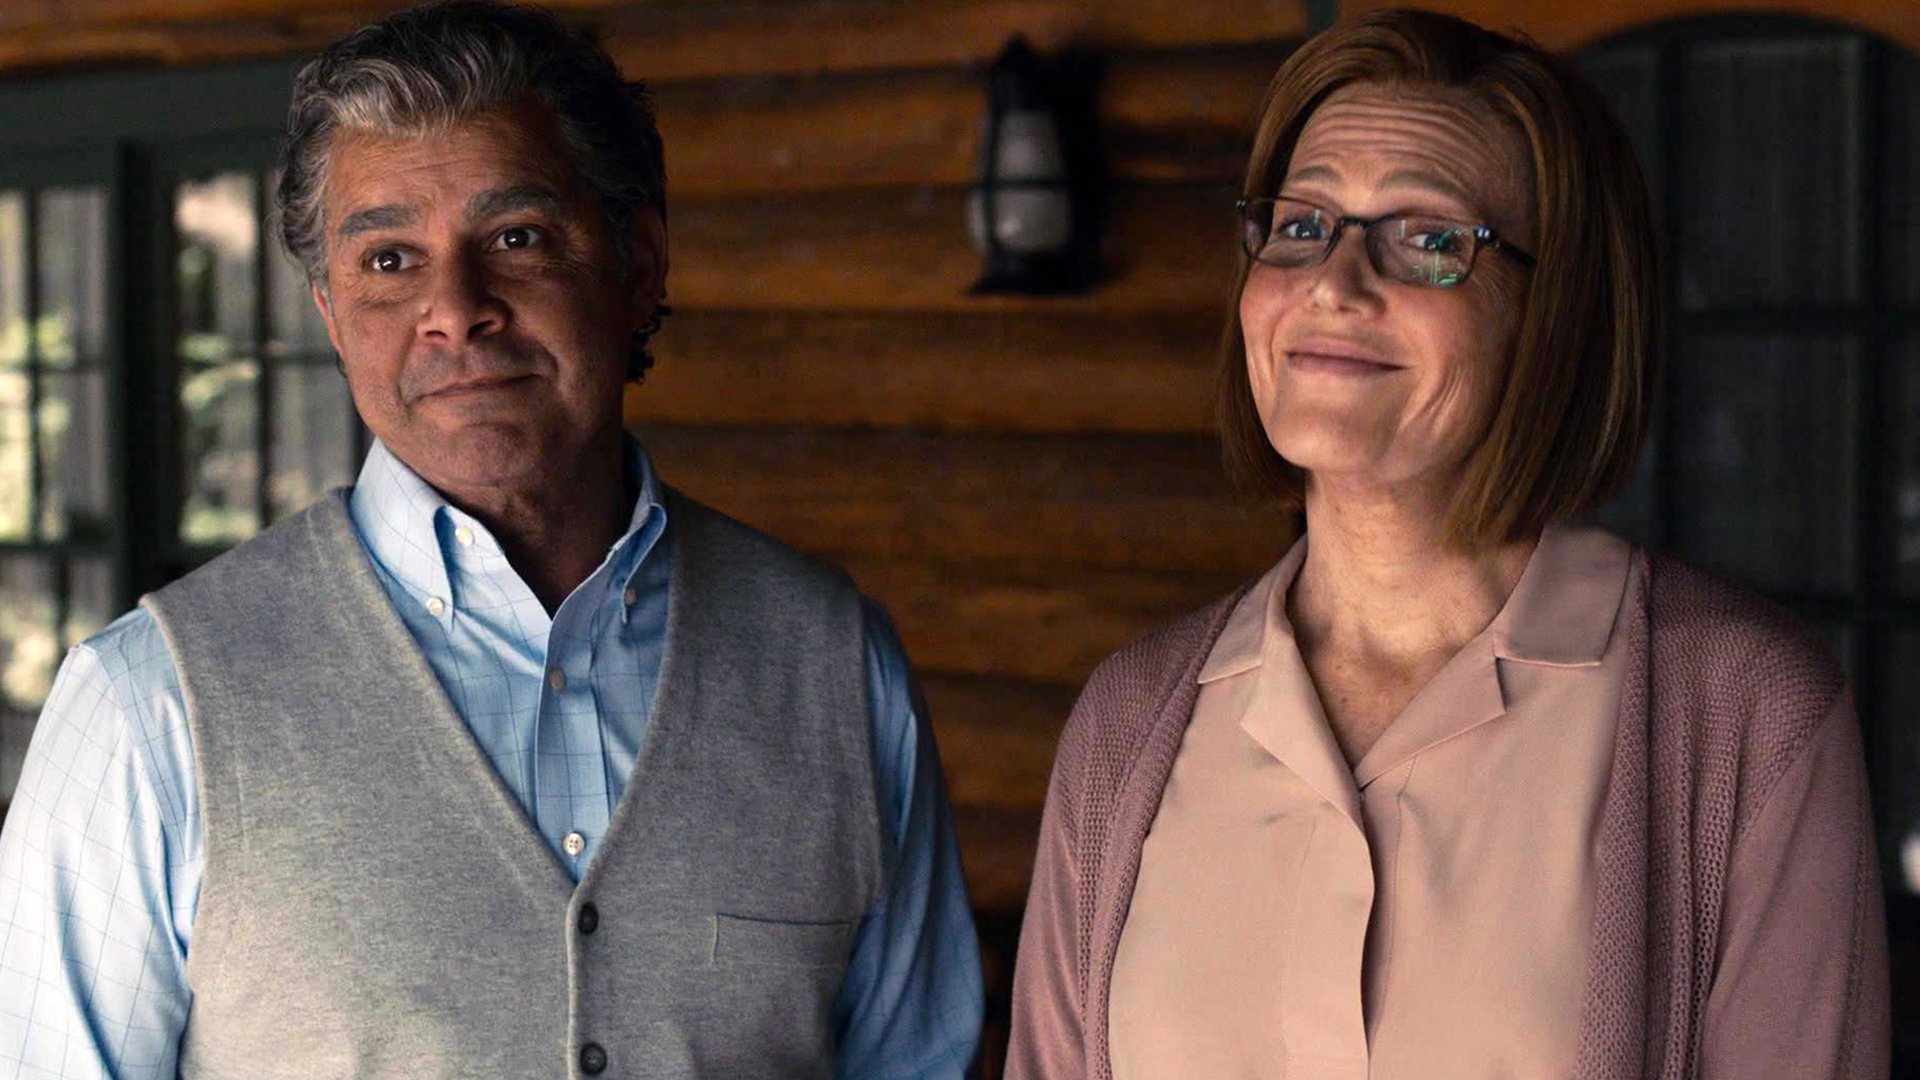 Jon Huertas as Miguel and Mandy Moore as Rebecca smiling at the Pearson family cabin in the ‘This Is Us’ Season 5 premiere